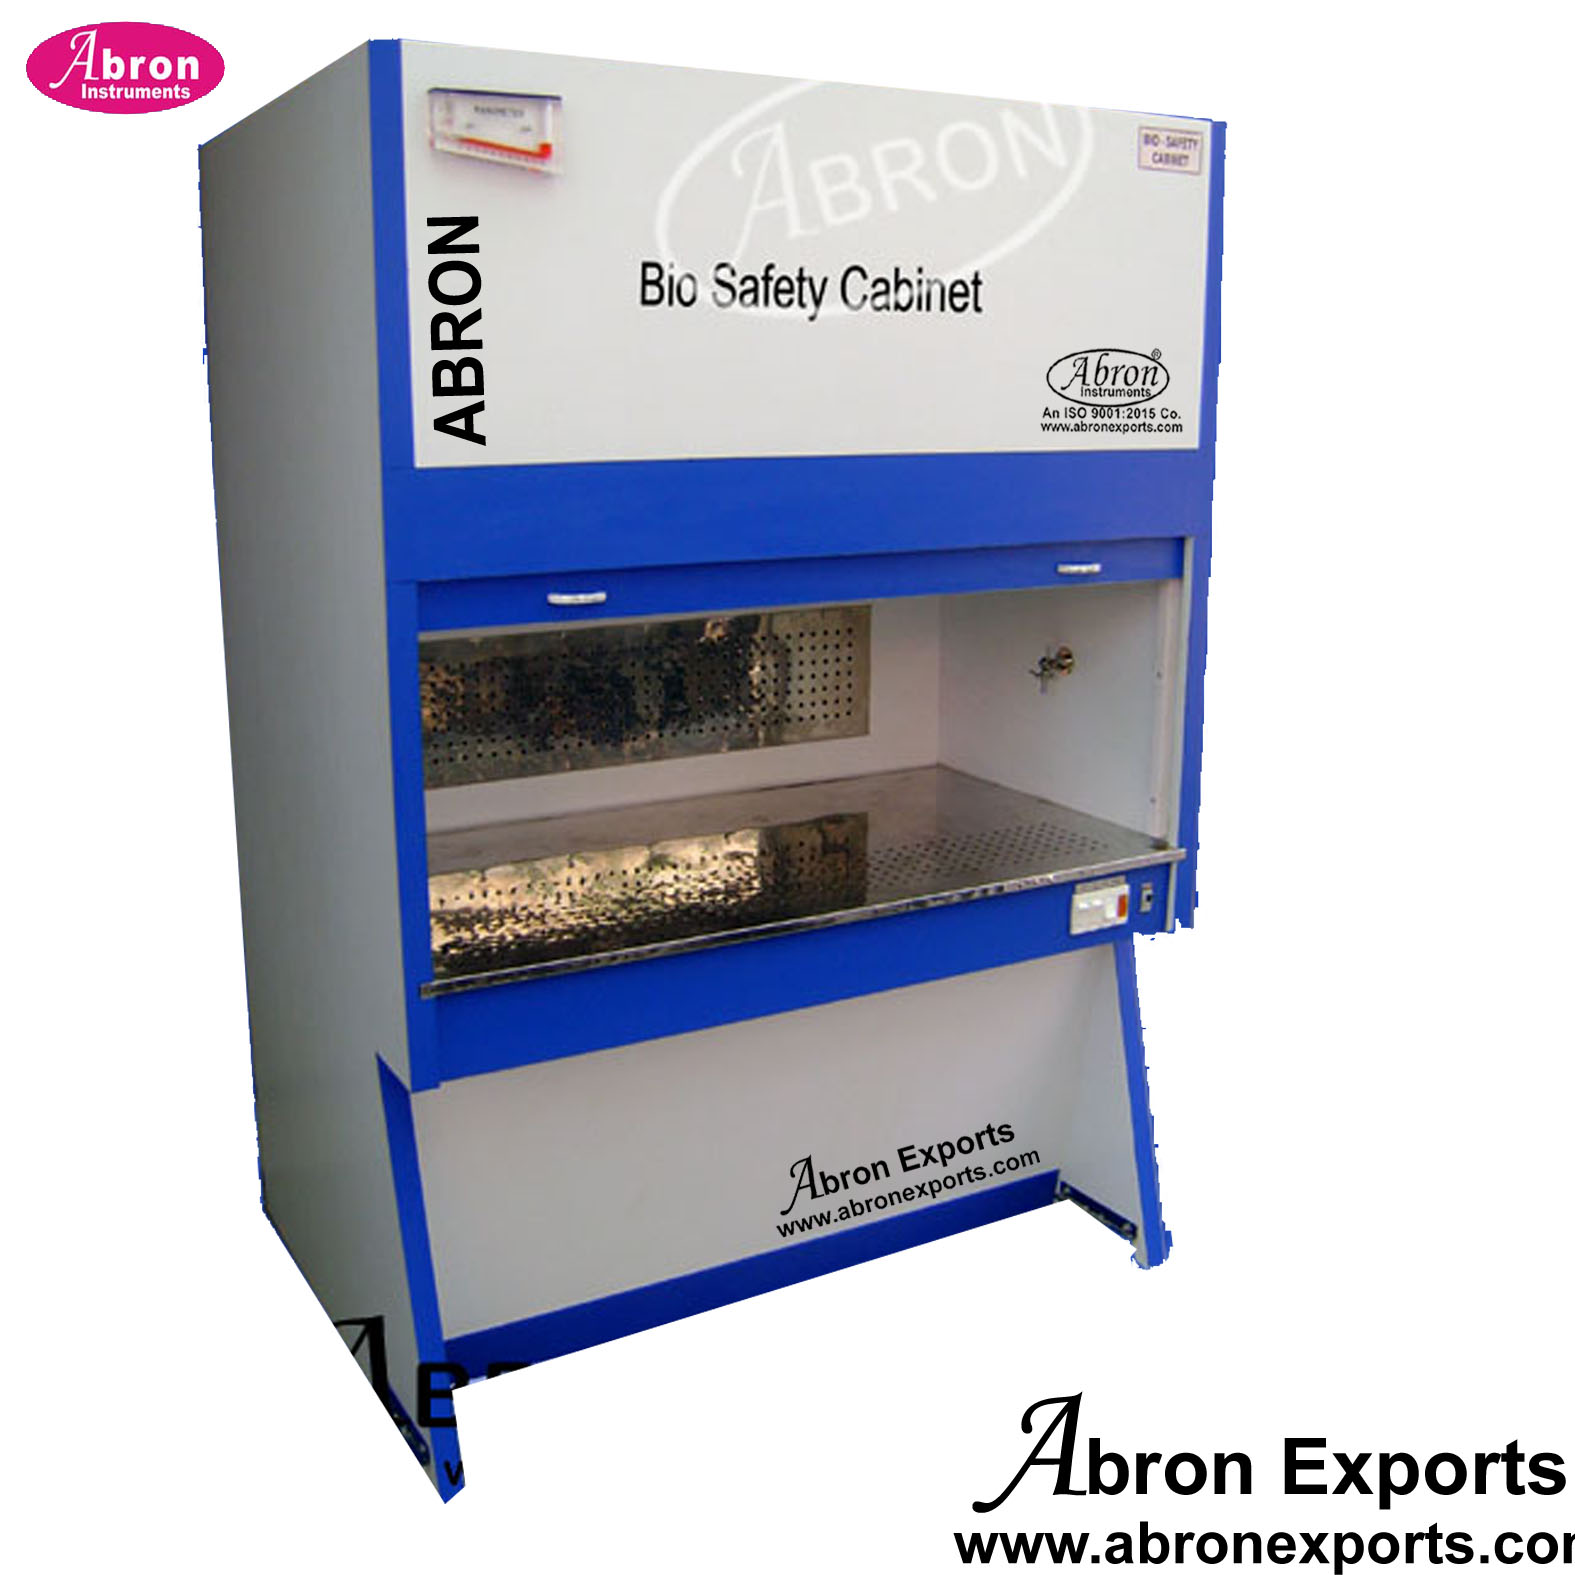 Biosafety cabinet 2x4feet with HEPAfilter fan wooden body SS inside Front door up biotechnology Abron ABM-2698B24W Bio safety